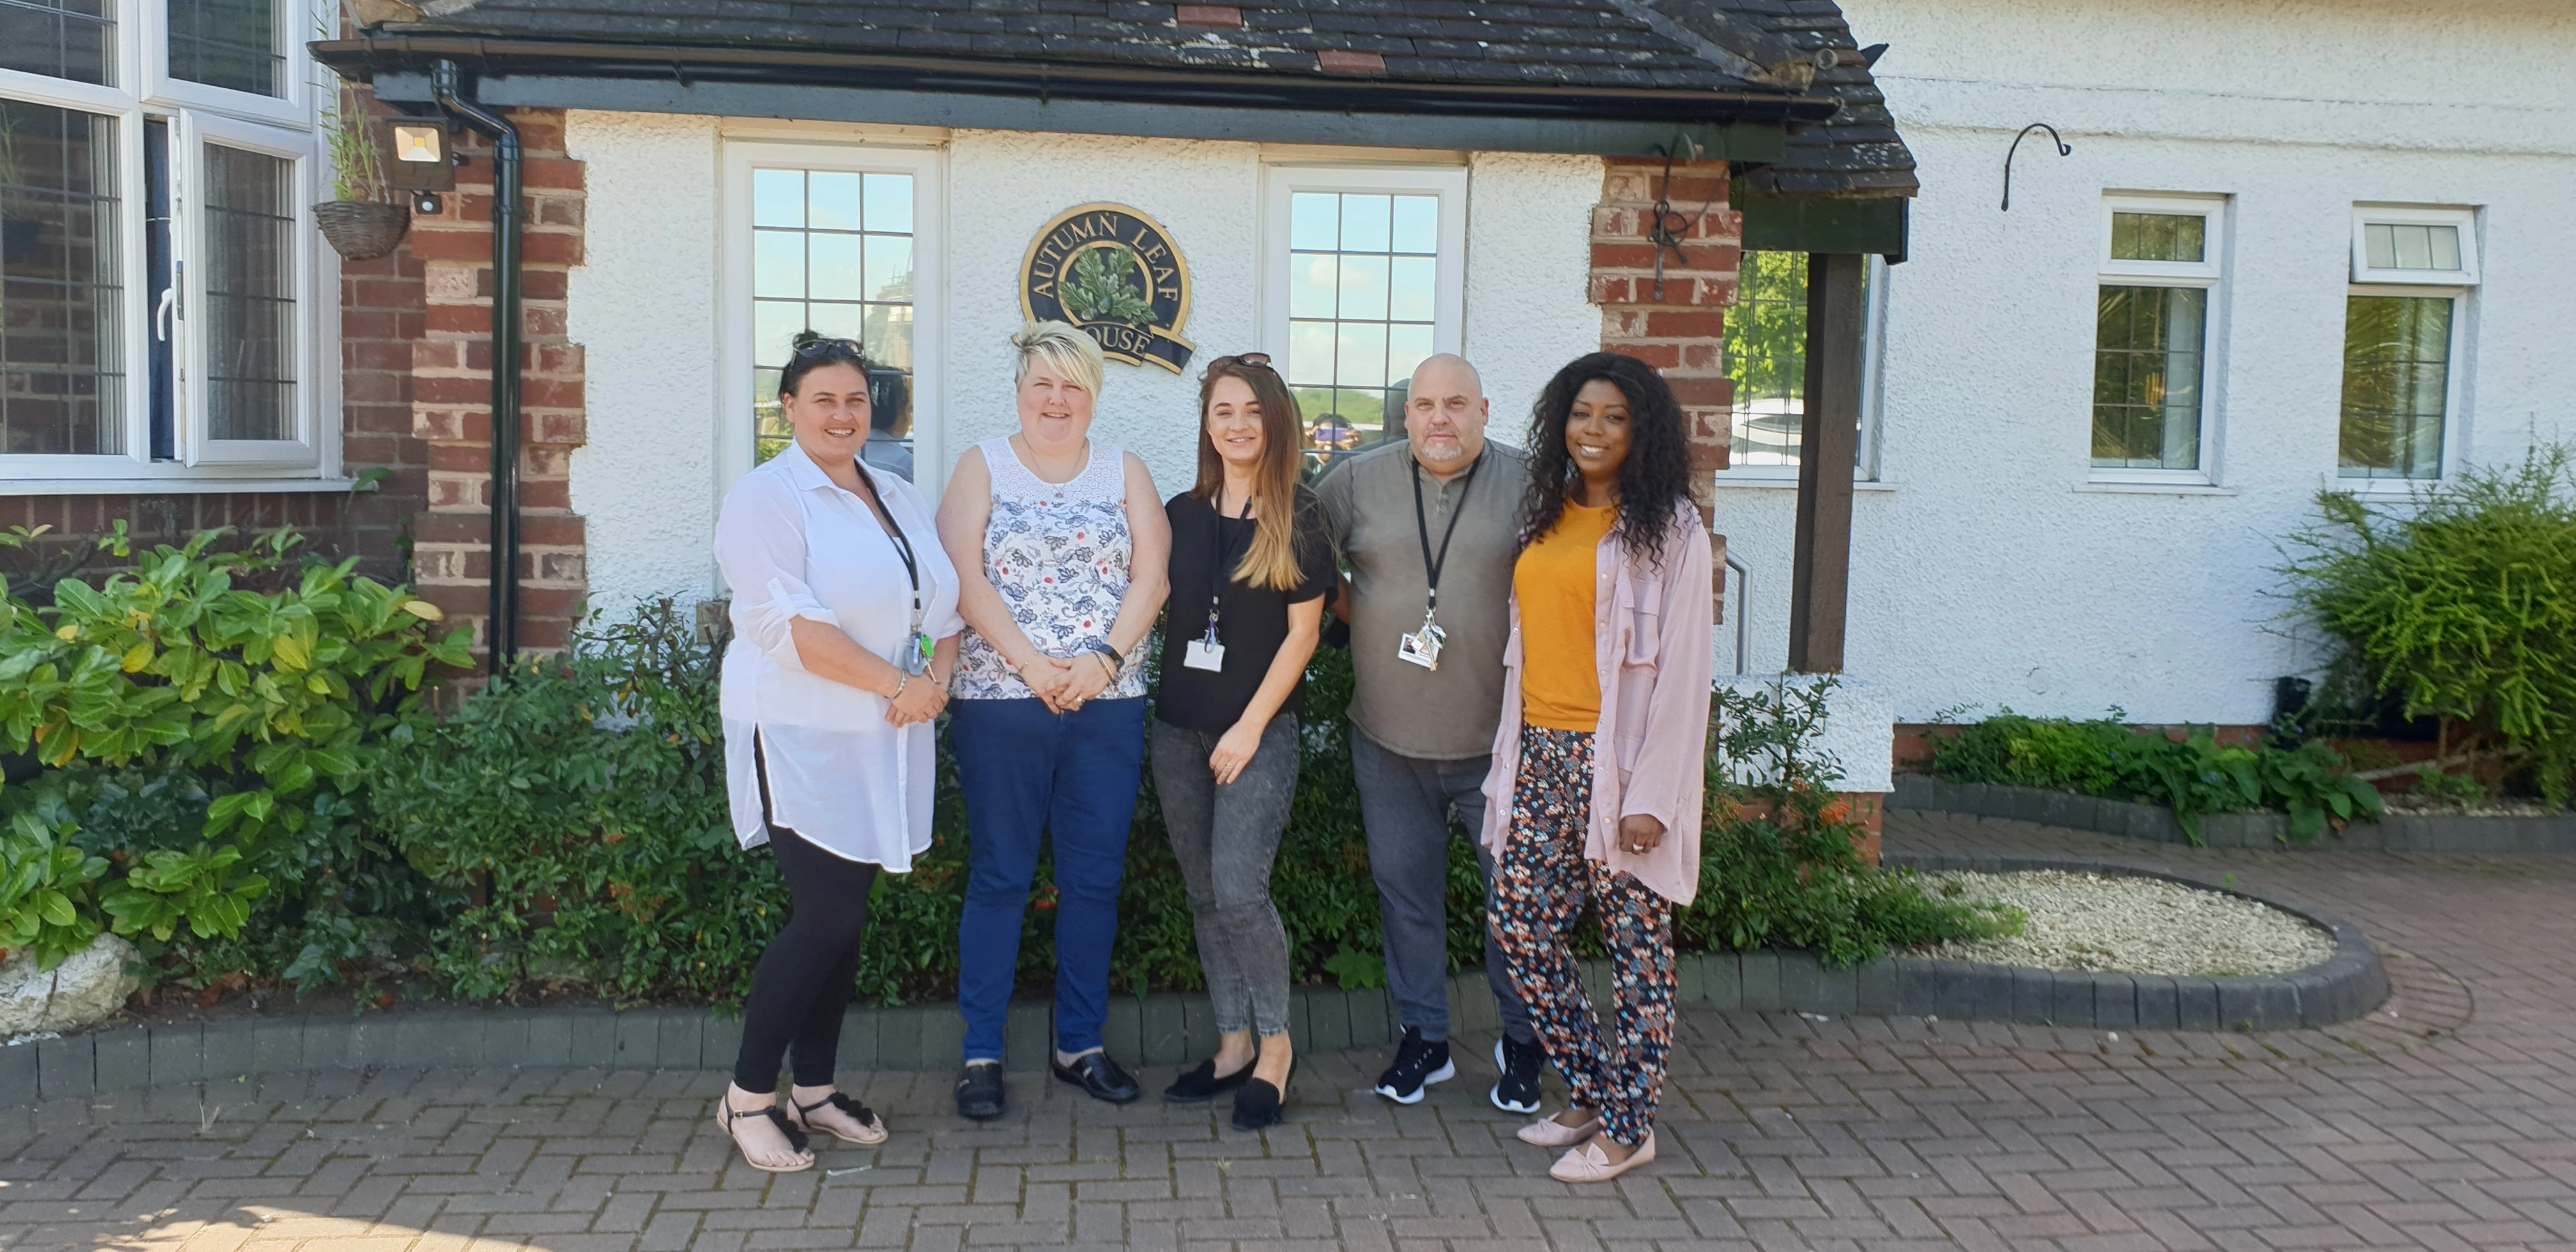 Autumn Leaf House care home has been rated 'outstanding' for being "responsive" by the CQC